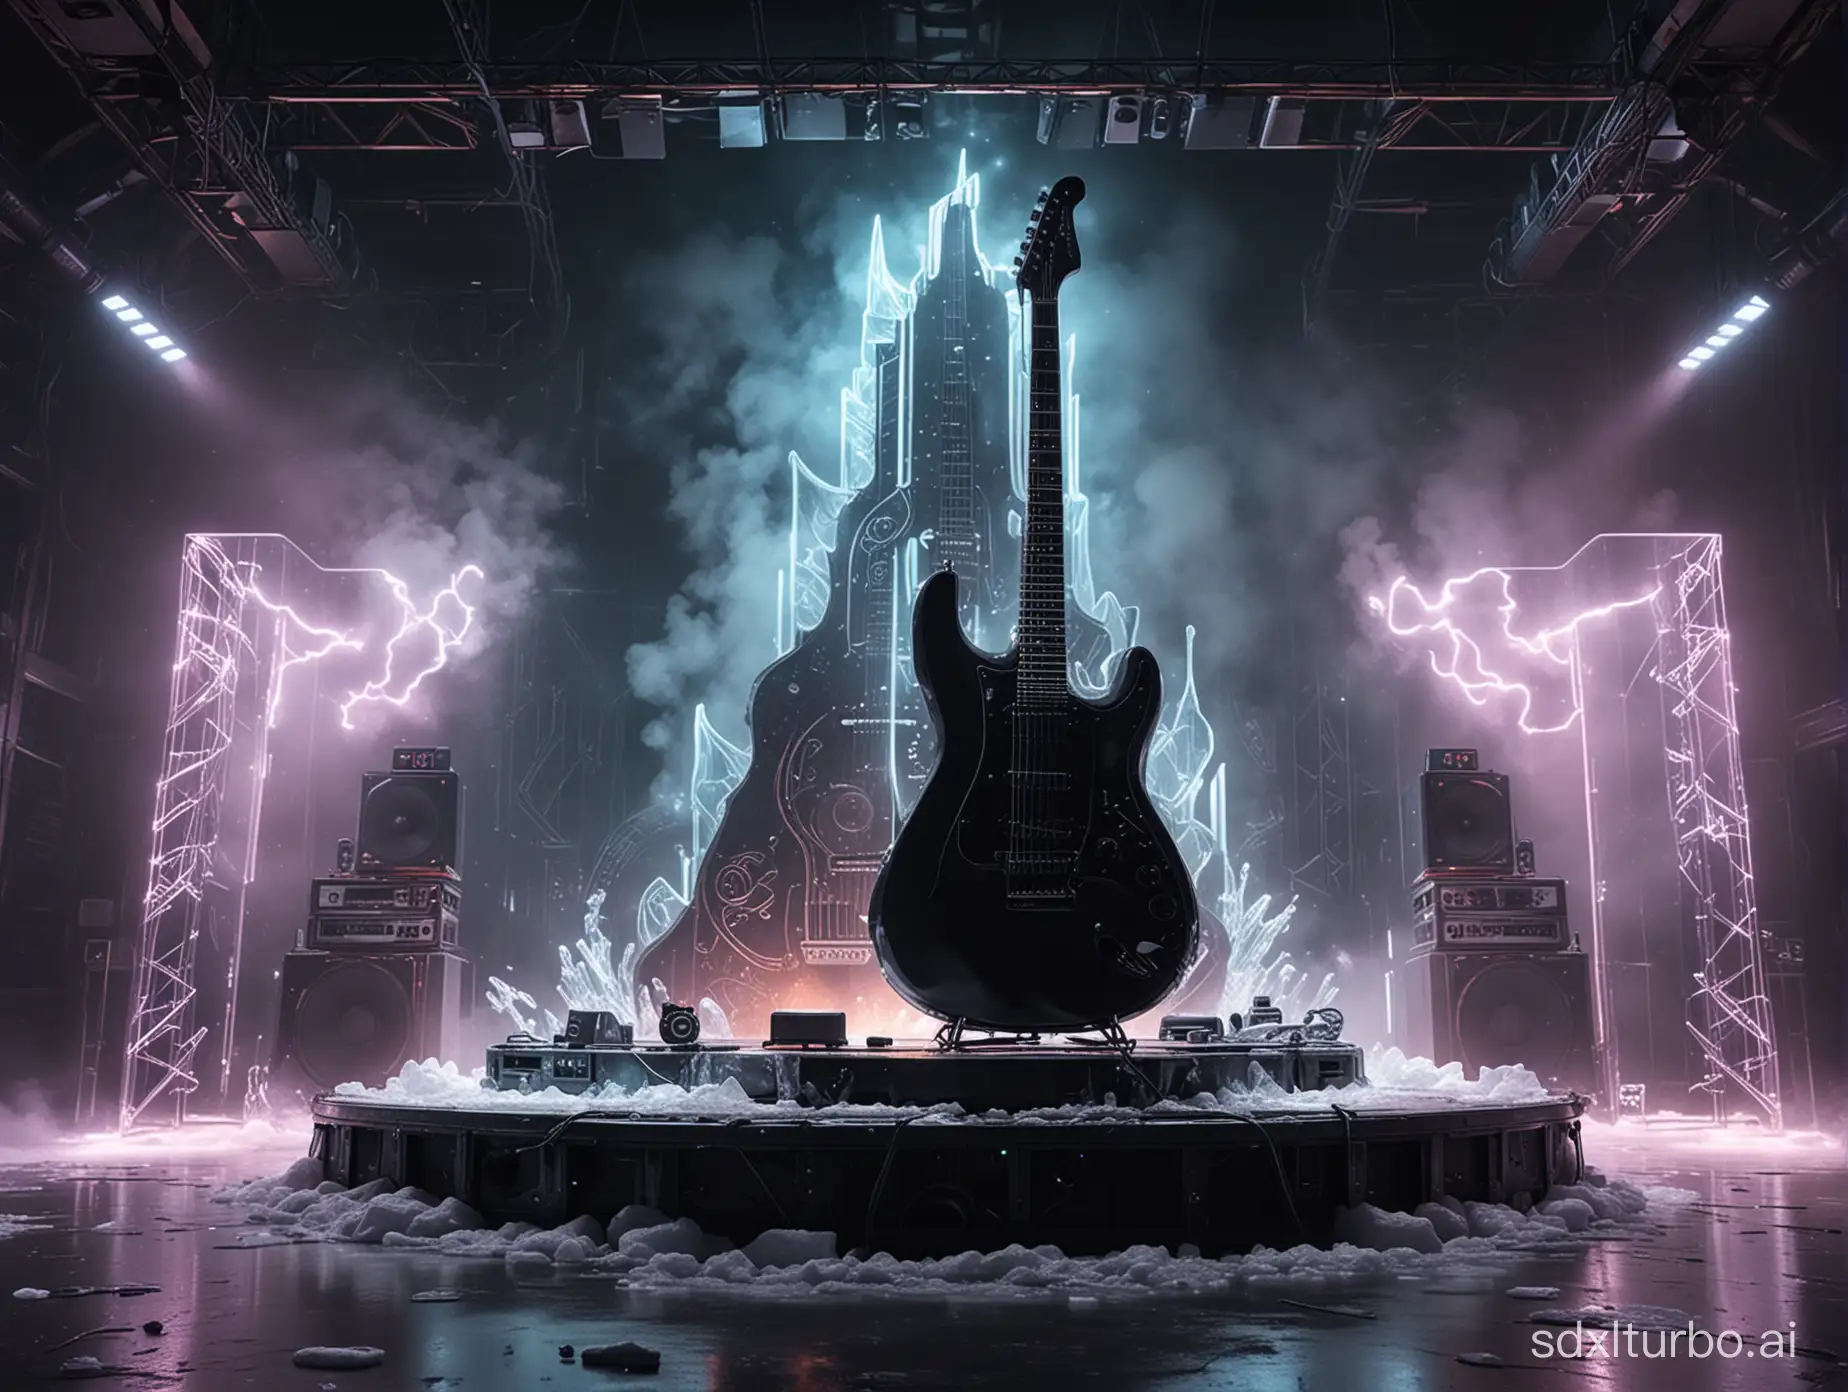 Futuristic-SciFi-Platform-with-Tilted-Guitar-Silhouette-and-Ice-Decorations